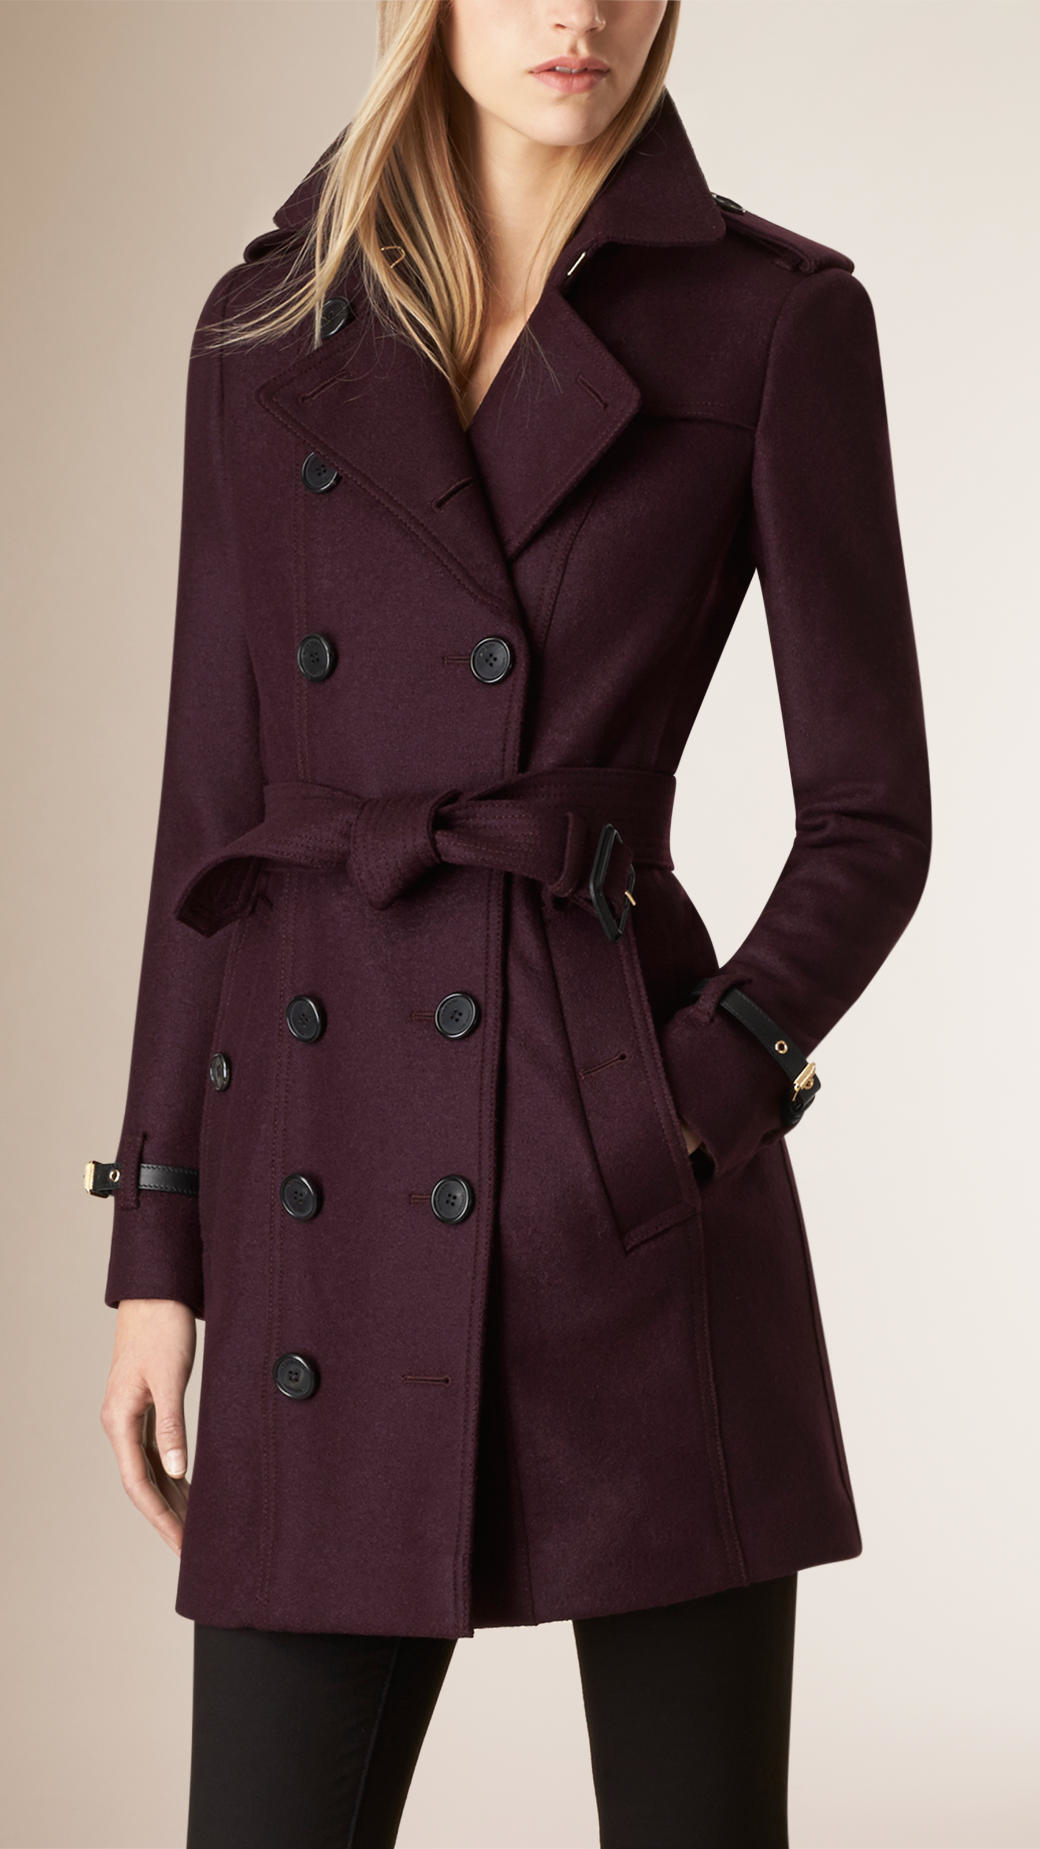 Lyst - Burberry Leather Trim Virgin Wool Trench Coat in Purple